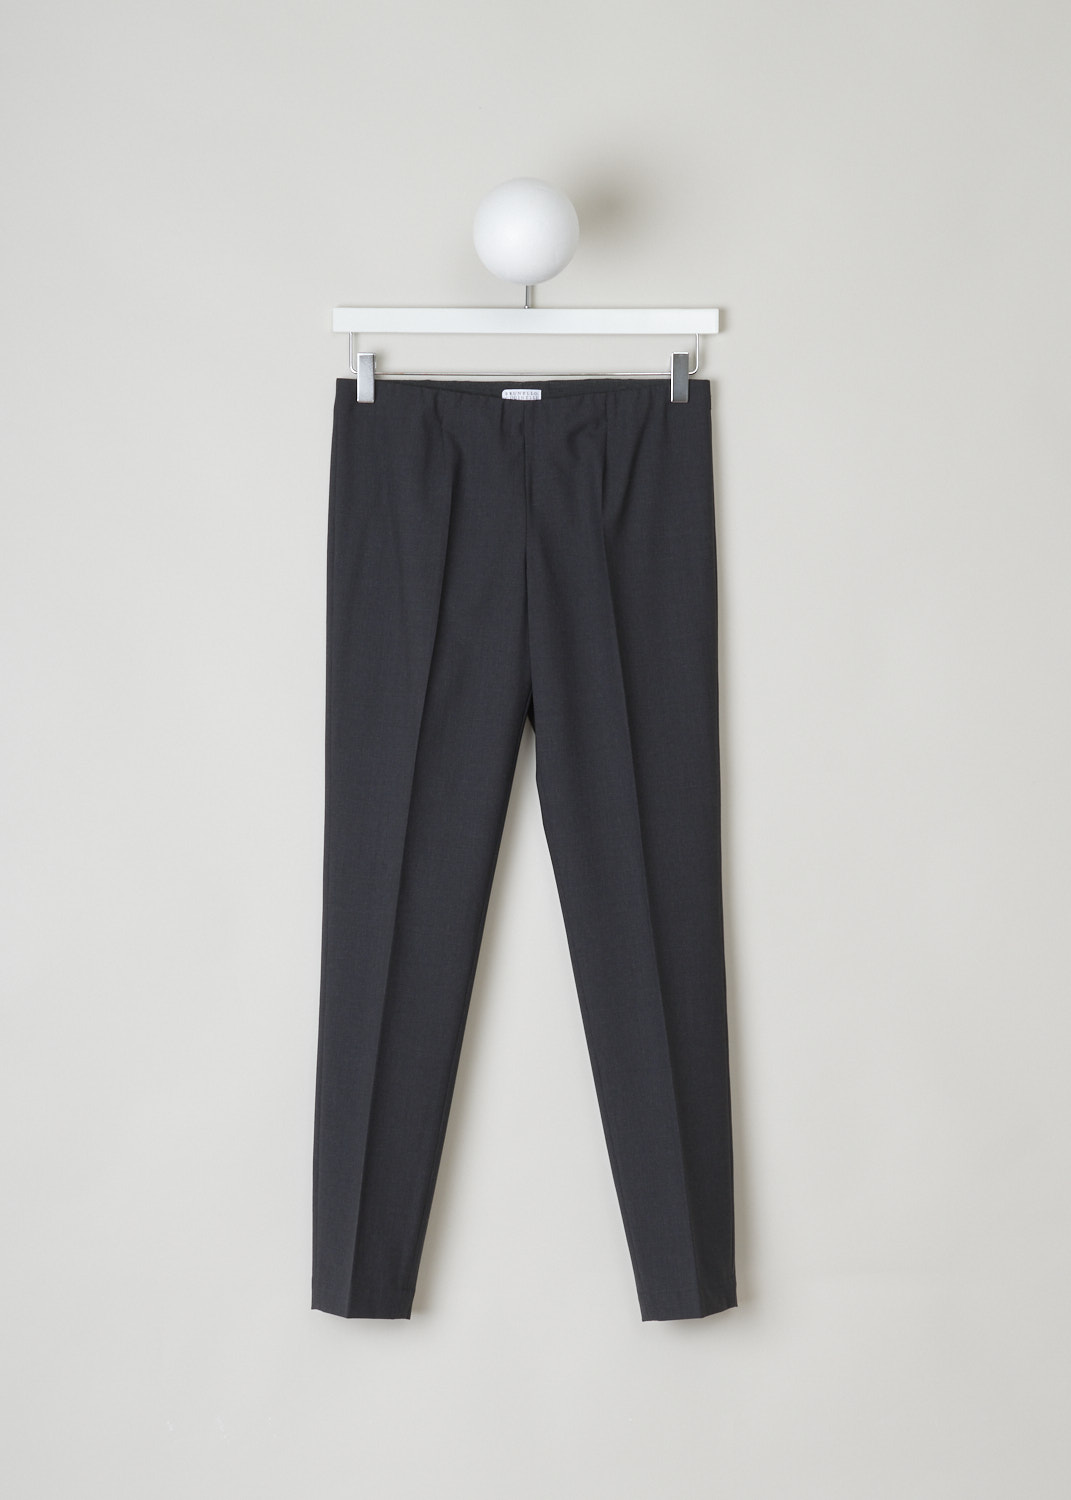 Brunello Cucinelli Charcoal coloured pants without waistband, M0W07P1794_C796, grey, front, This charcoal coloured woolen pants without a waistband is one of those must have basics.